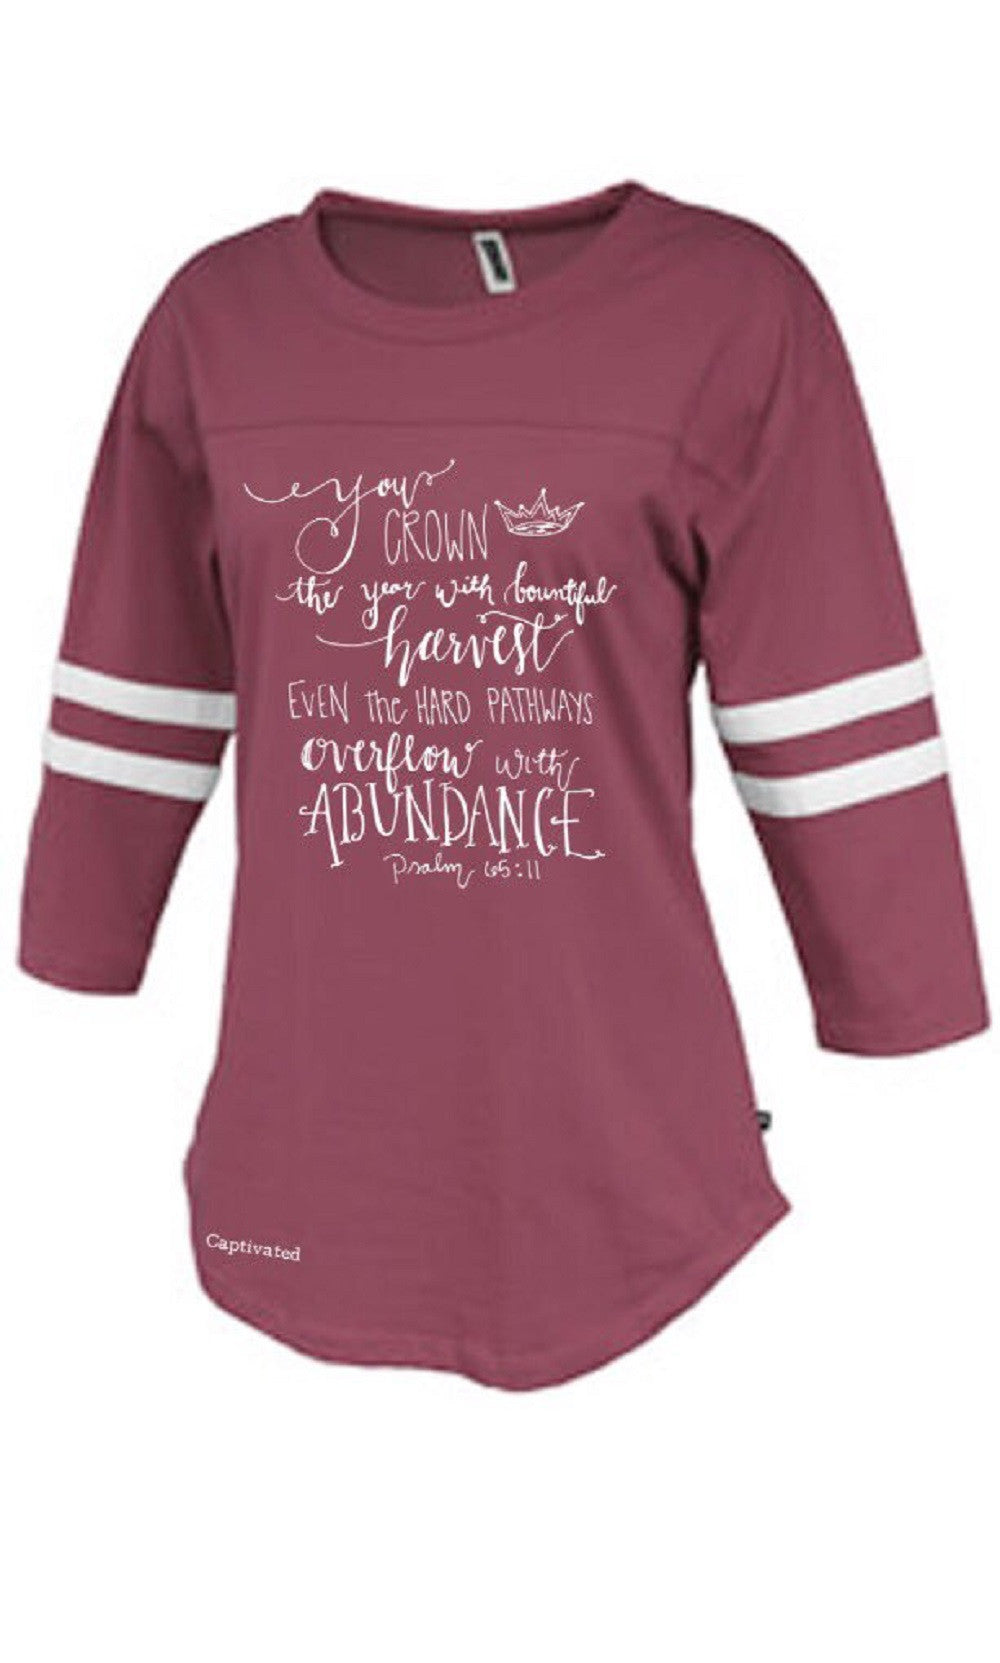 SALE Sassy Frass Captivated Harvest Maroon Rally Jersey Long Sleeve Bright Girlie T Shirt